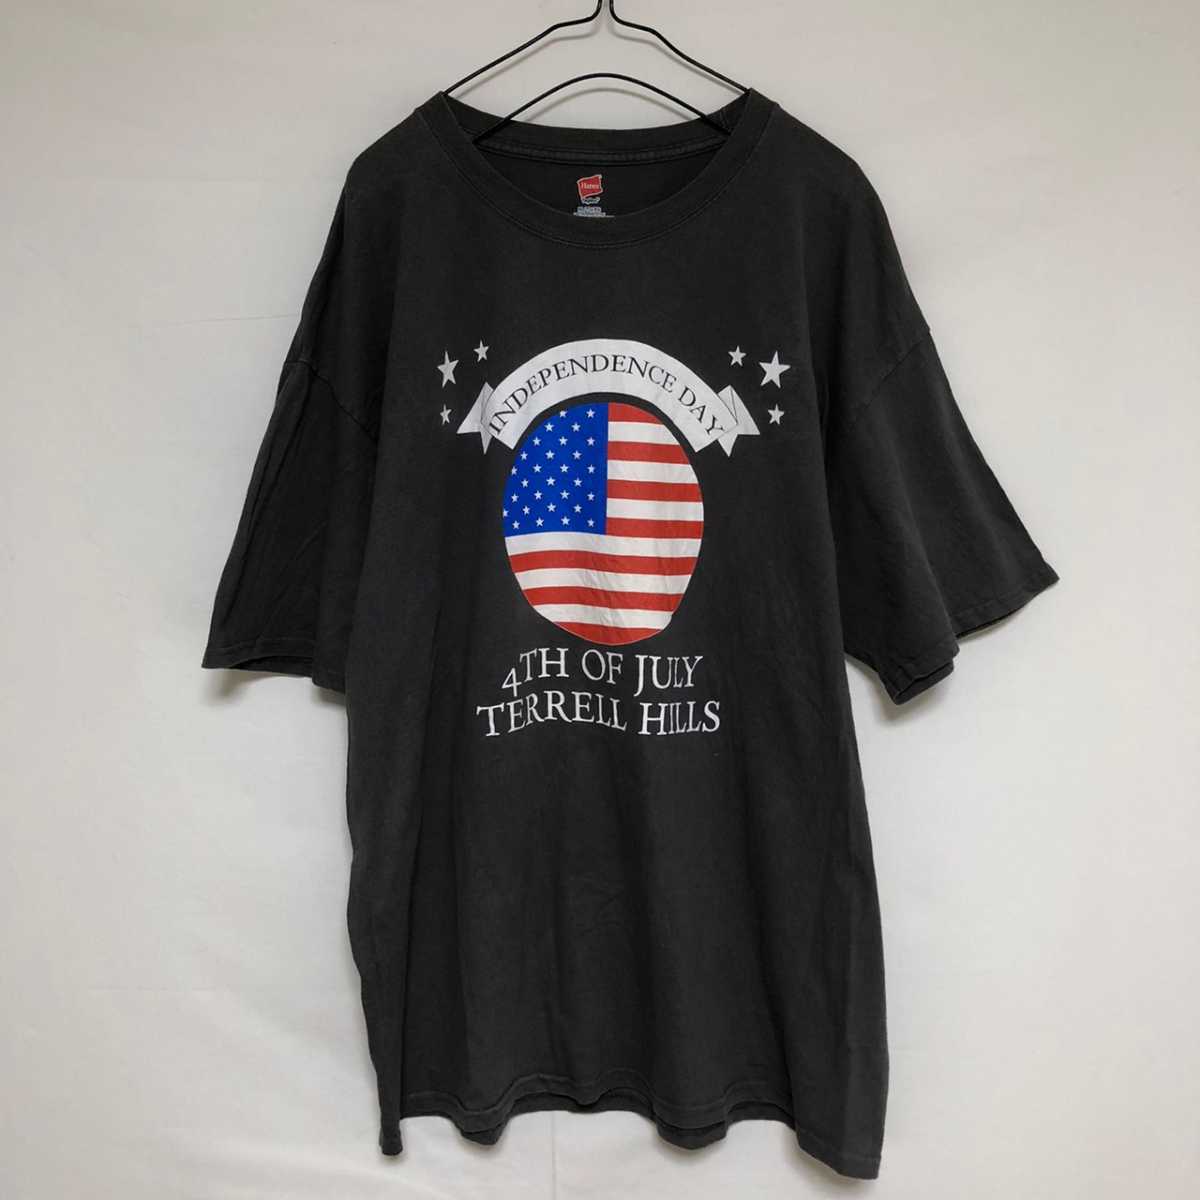 Hanes Tシャツ アメリカ USA Independence Day テレルヒルズ 記念 ダークグレー 4TH OF JULY TERRELL HIlLS _画像1